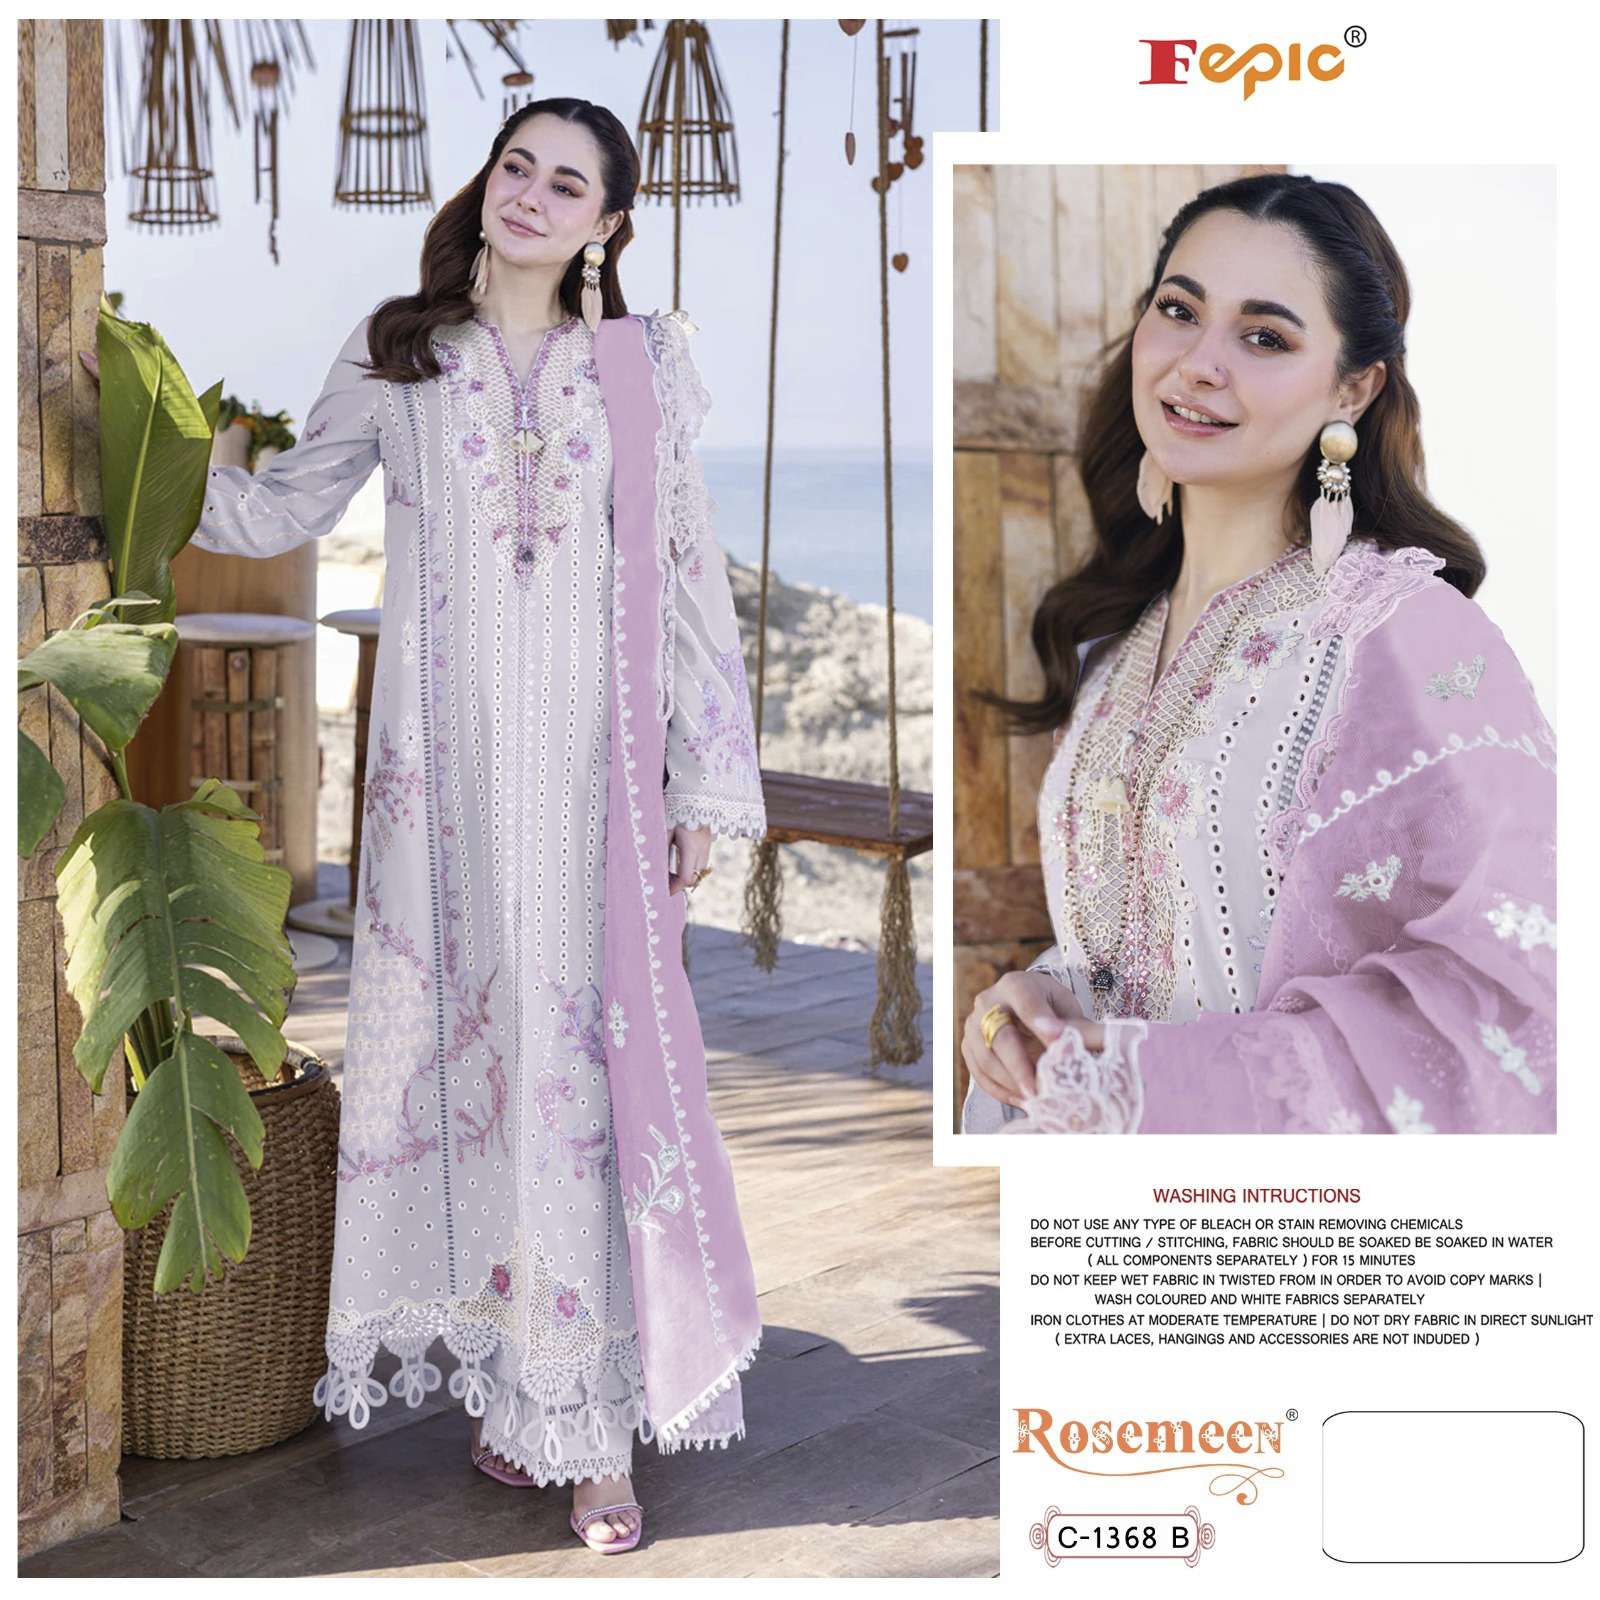 FEPIC ROSEMEEN 1368 COTTON PRINTED PAKISTANI SUITS 